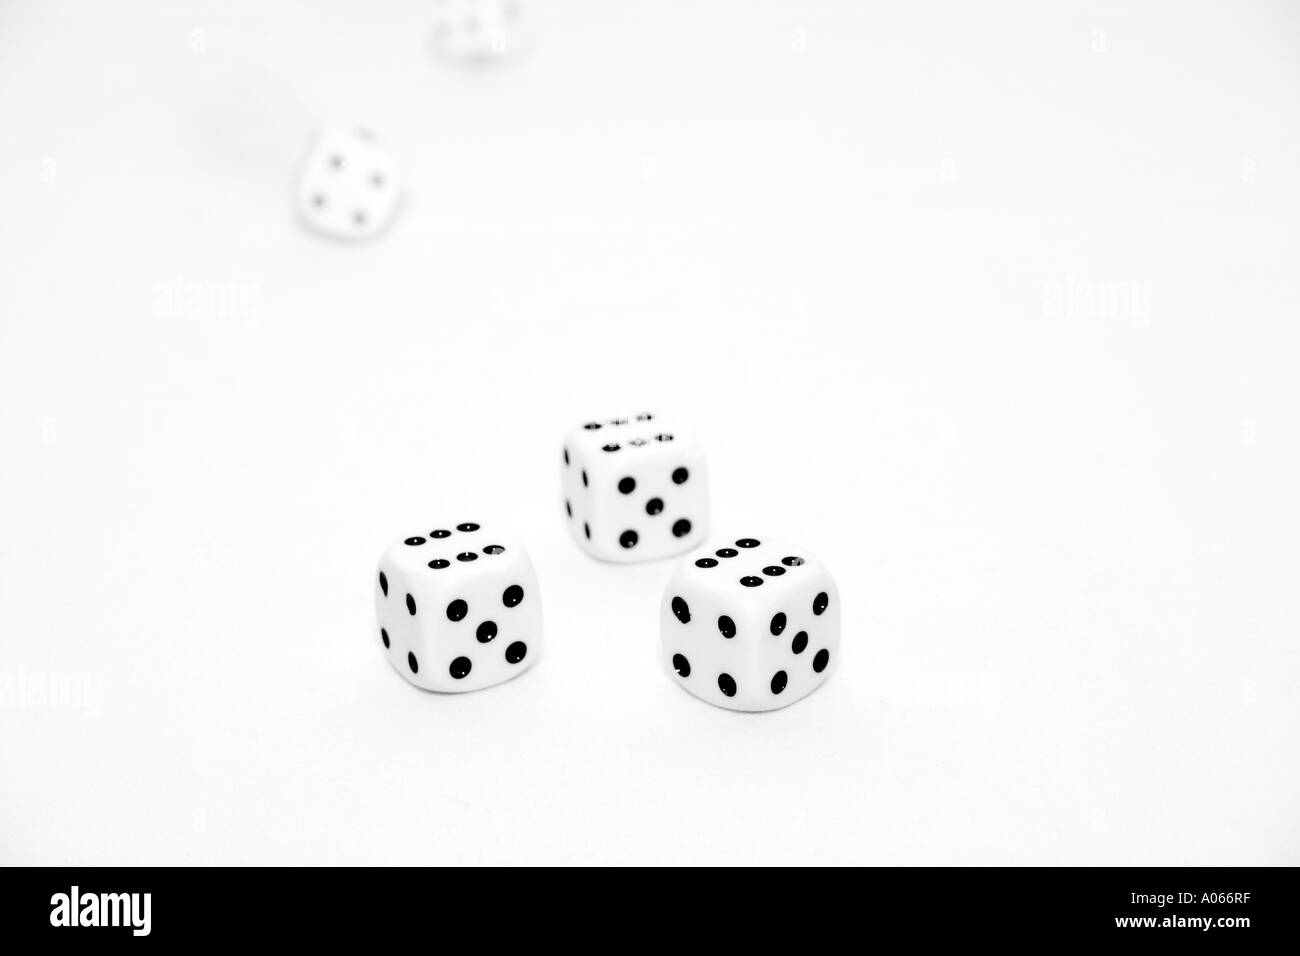 Three dices having black counts is seen against a white background Stock Photo